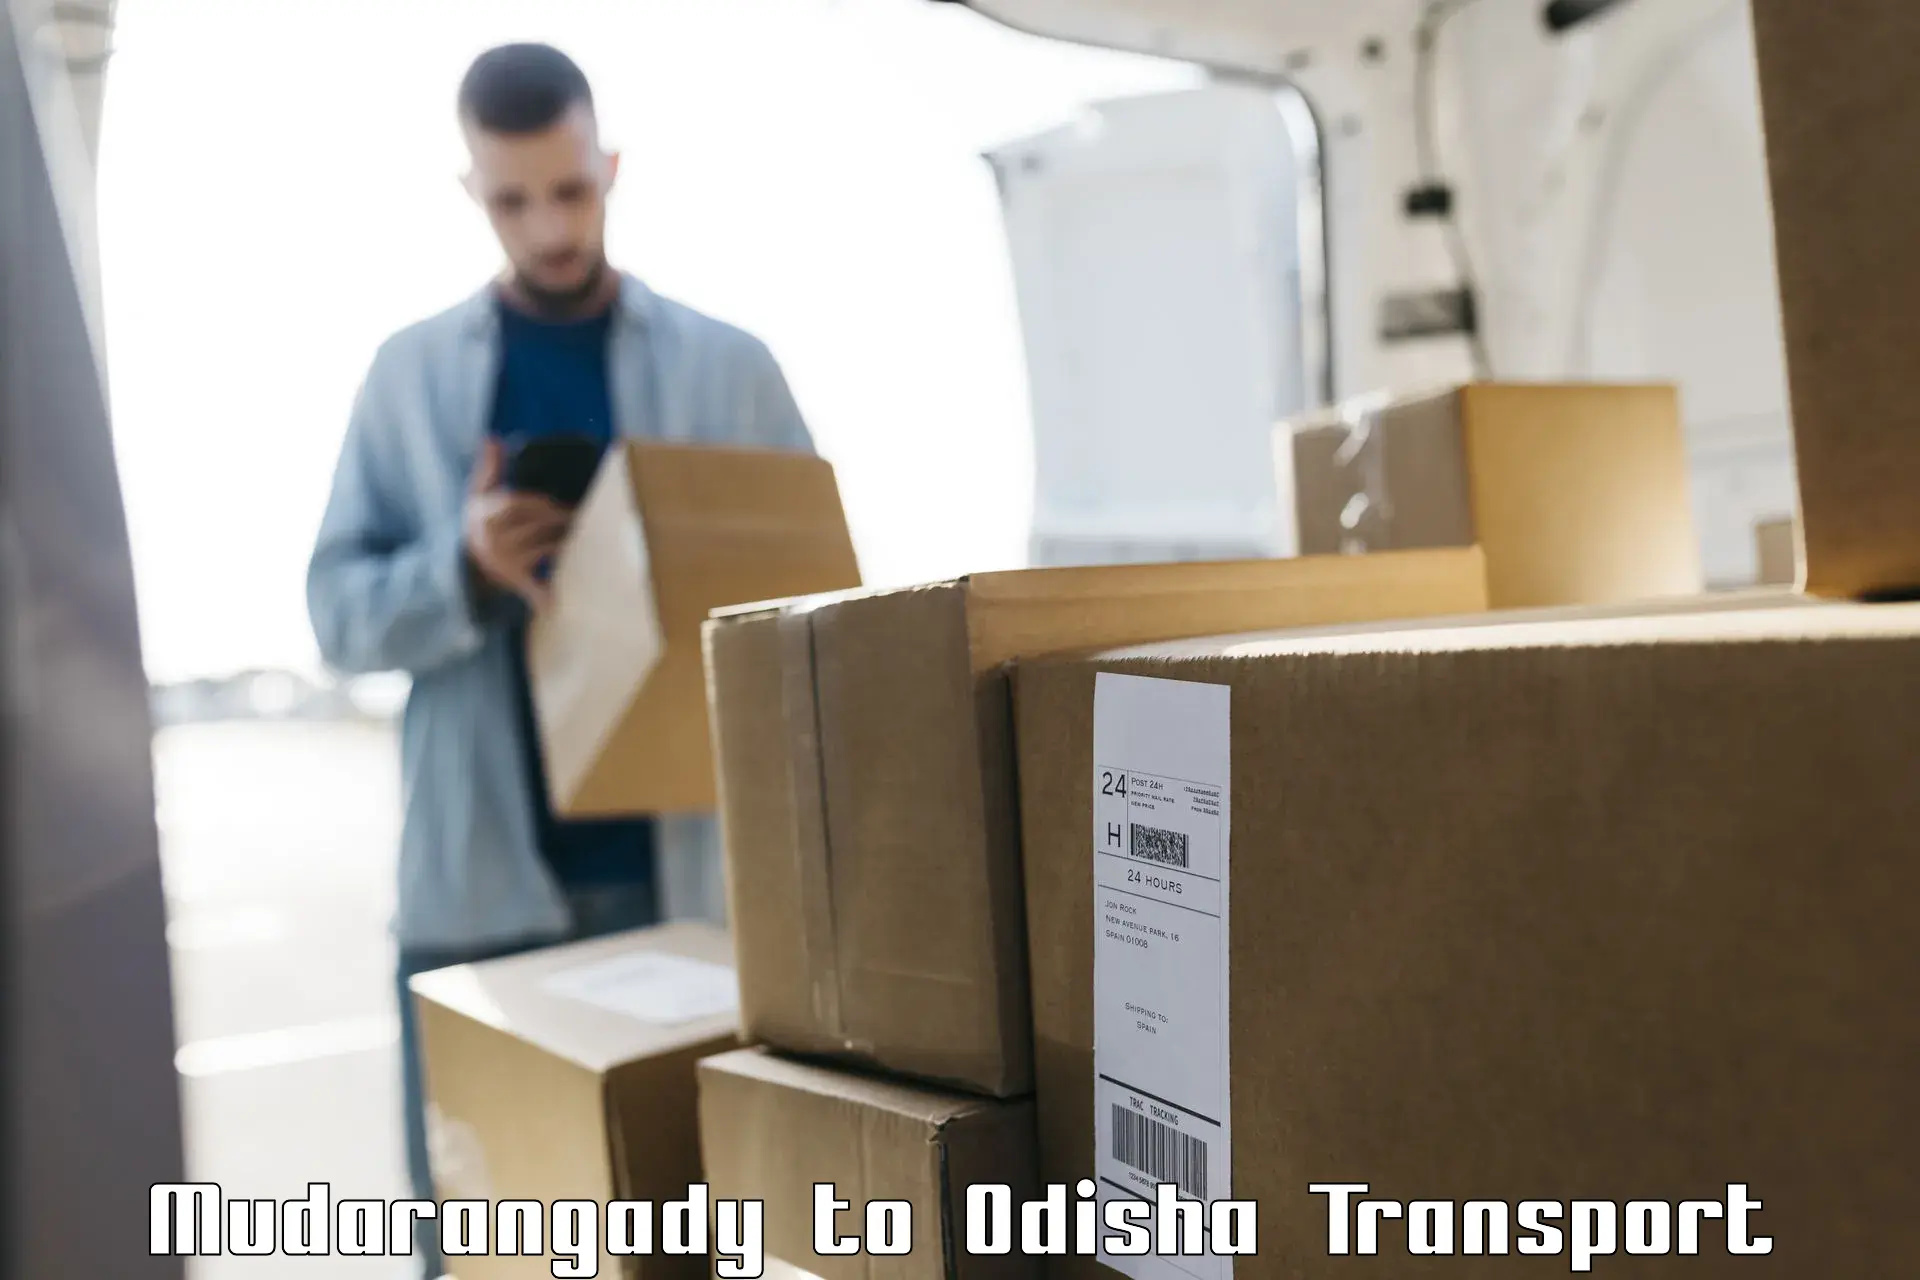 Truck transport companies in India Mudarangady to Chandipur